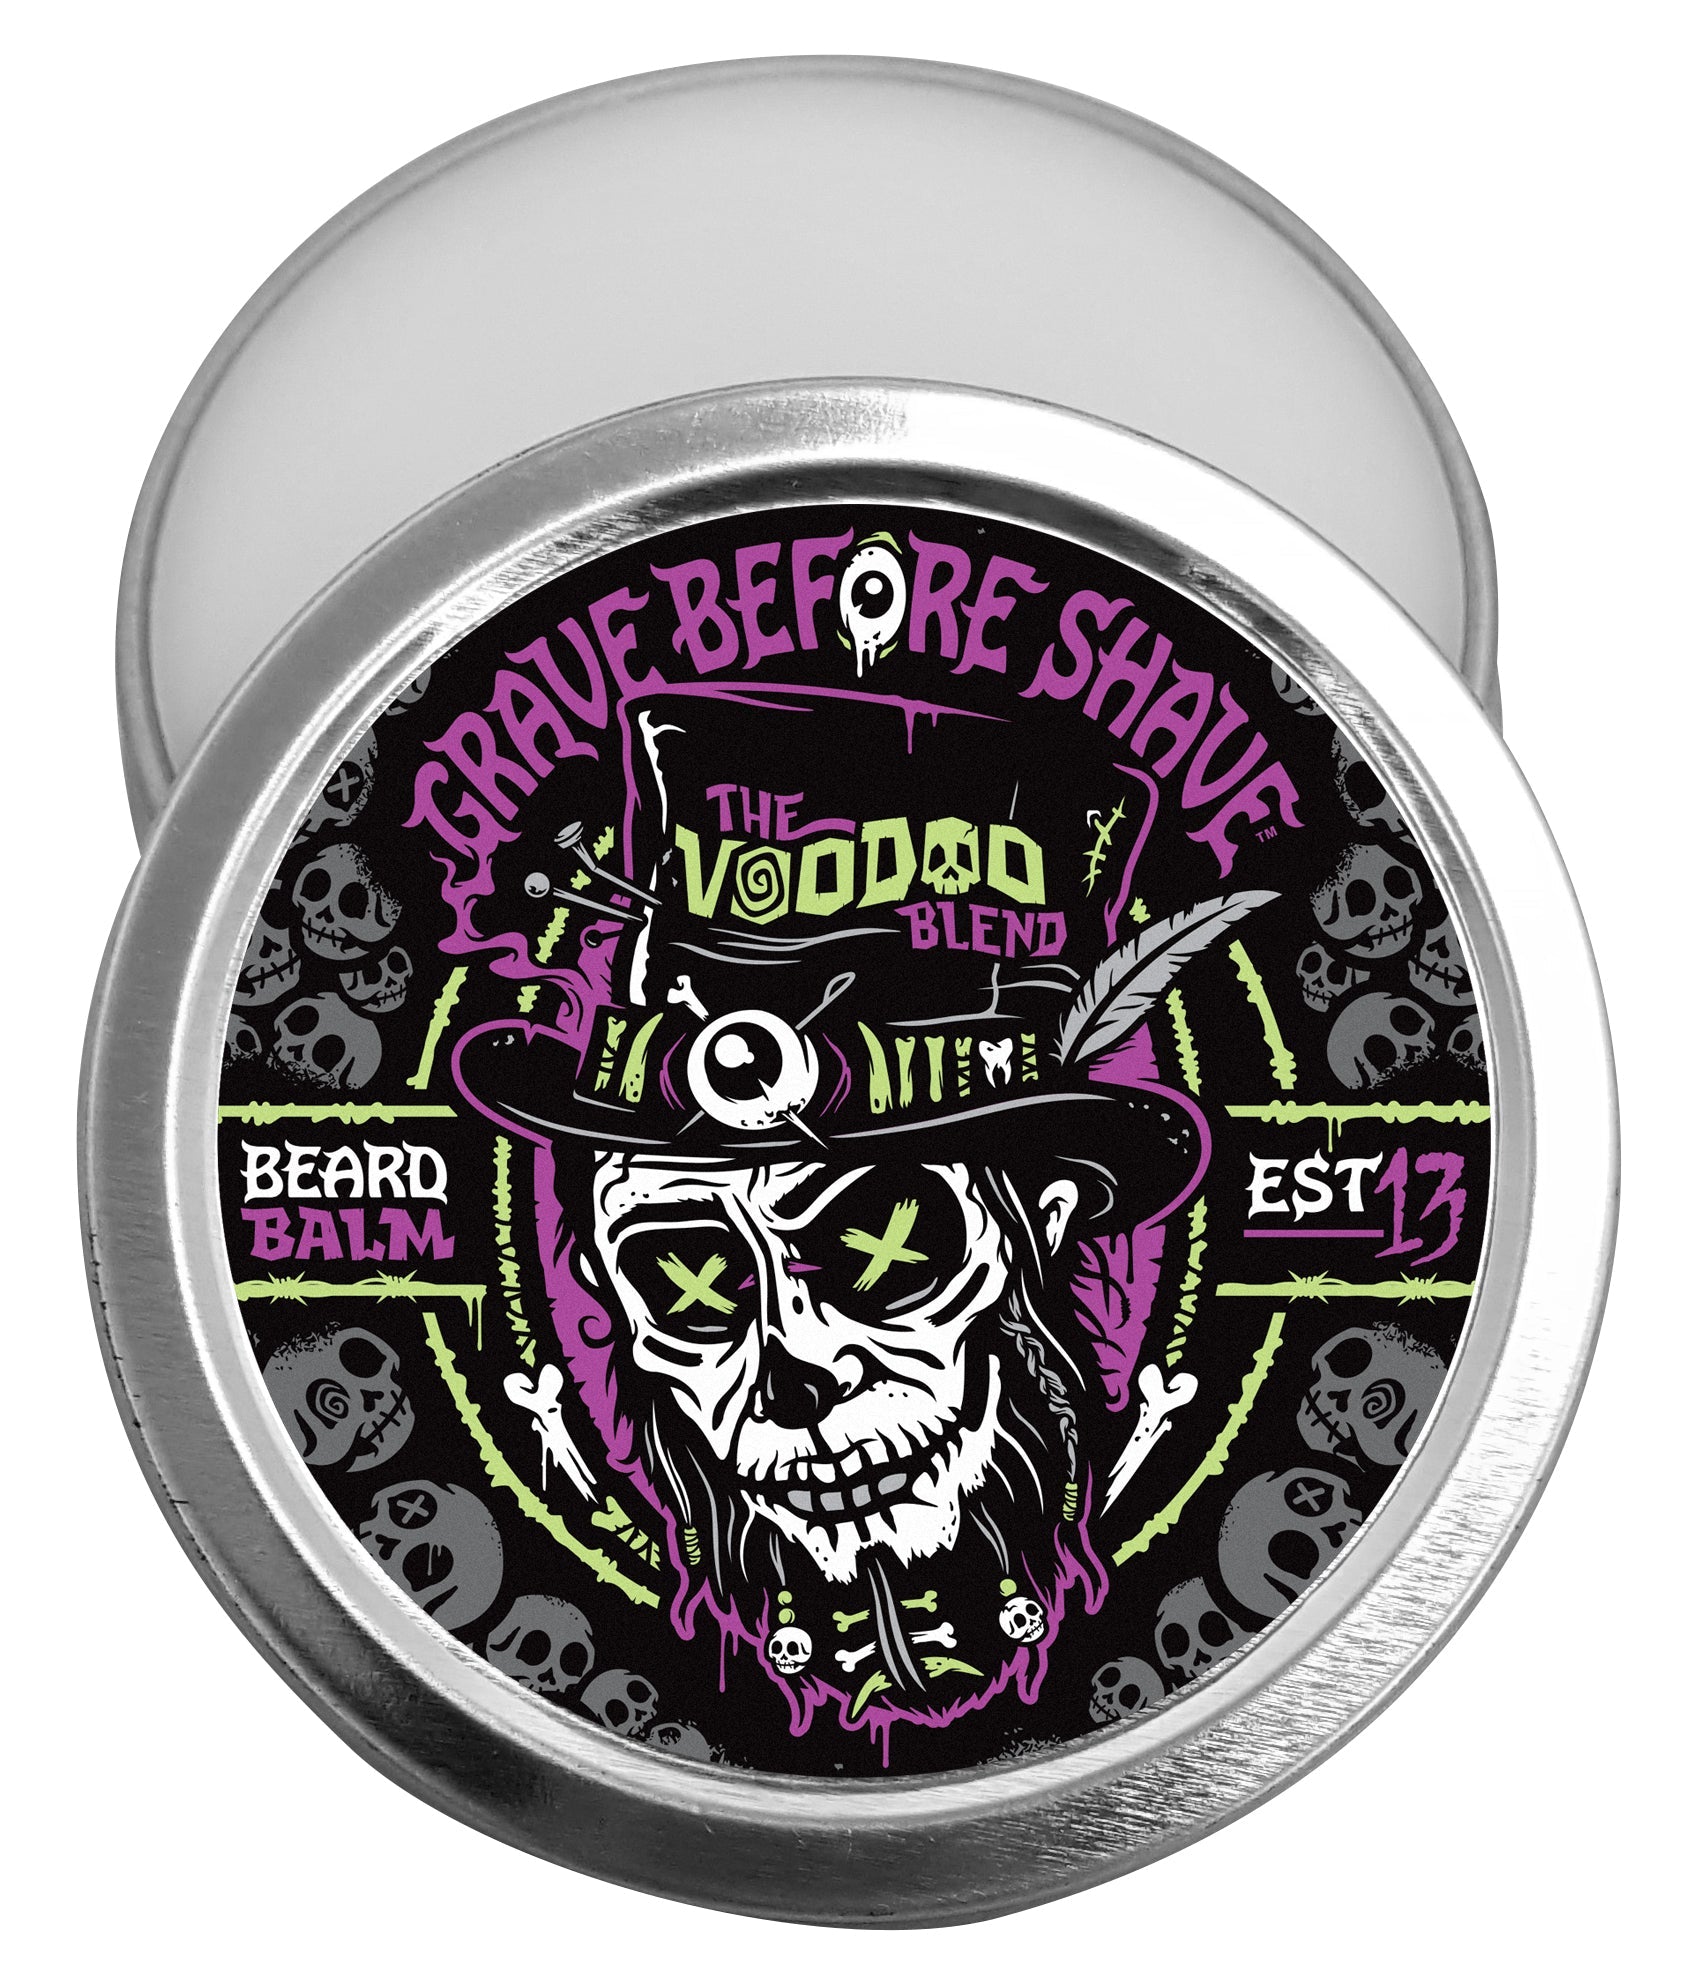 GRAVE BEFORE SHAVE BEARD BALM - VOODOO BLEND